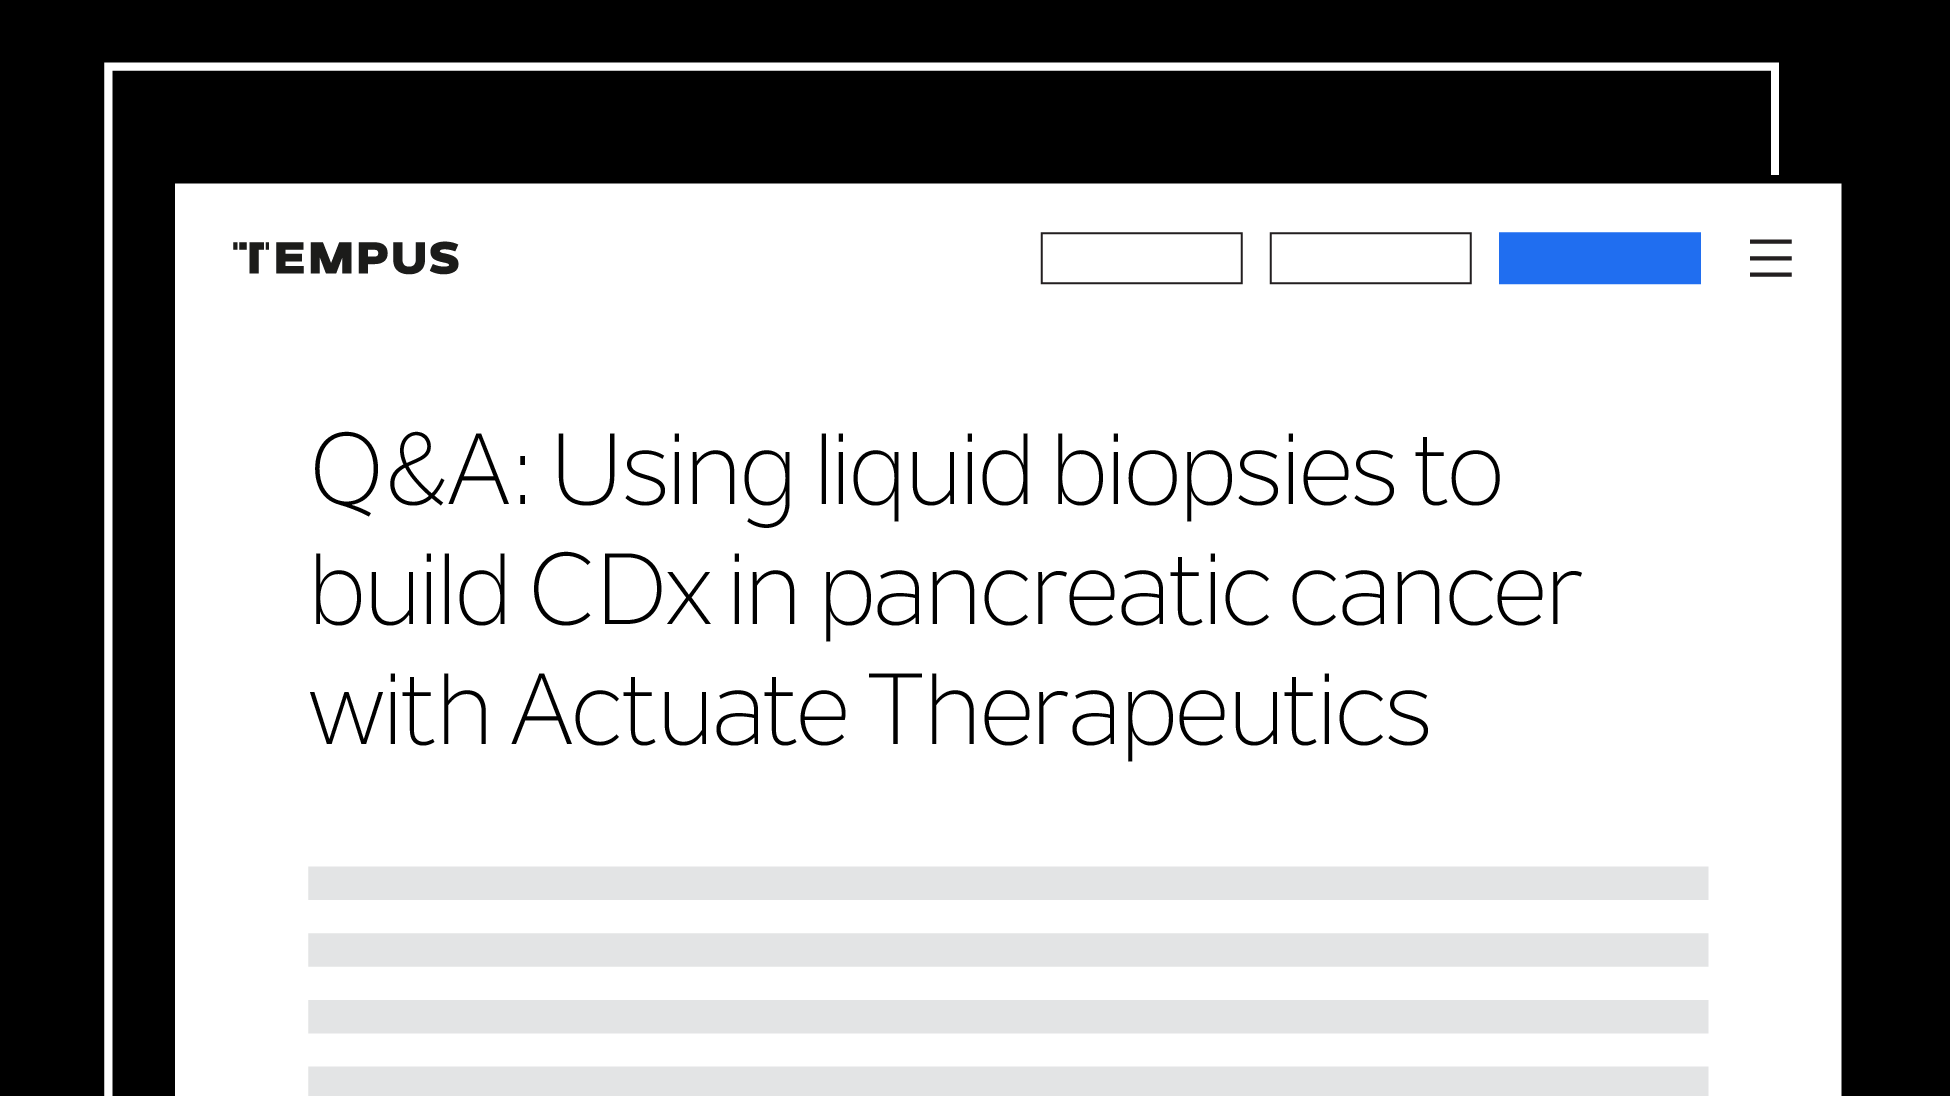 Q&A: Using liquid biopsies  to build CDx in pancreatic cancer with Actuate Therapeutics